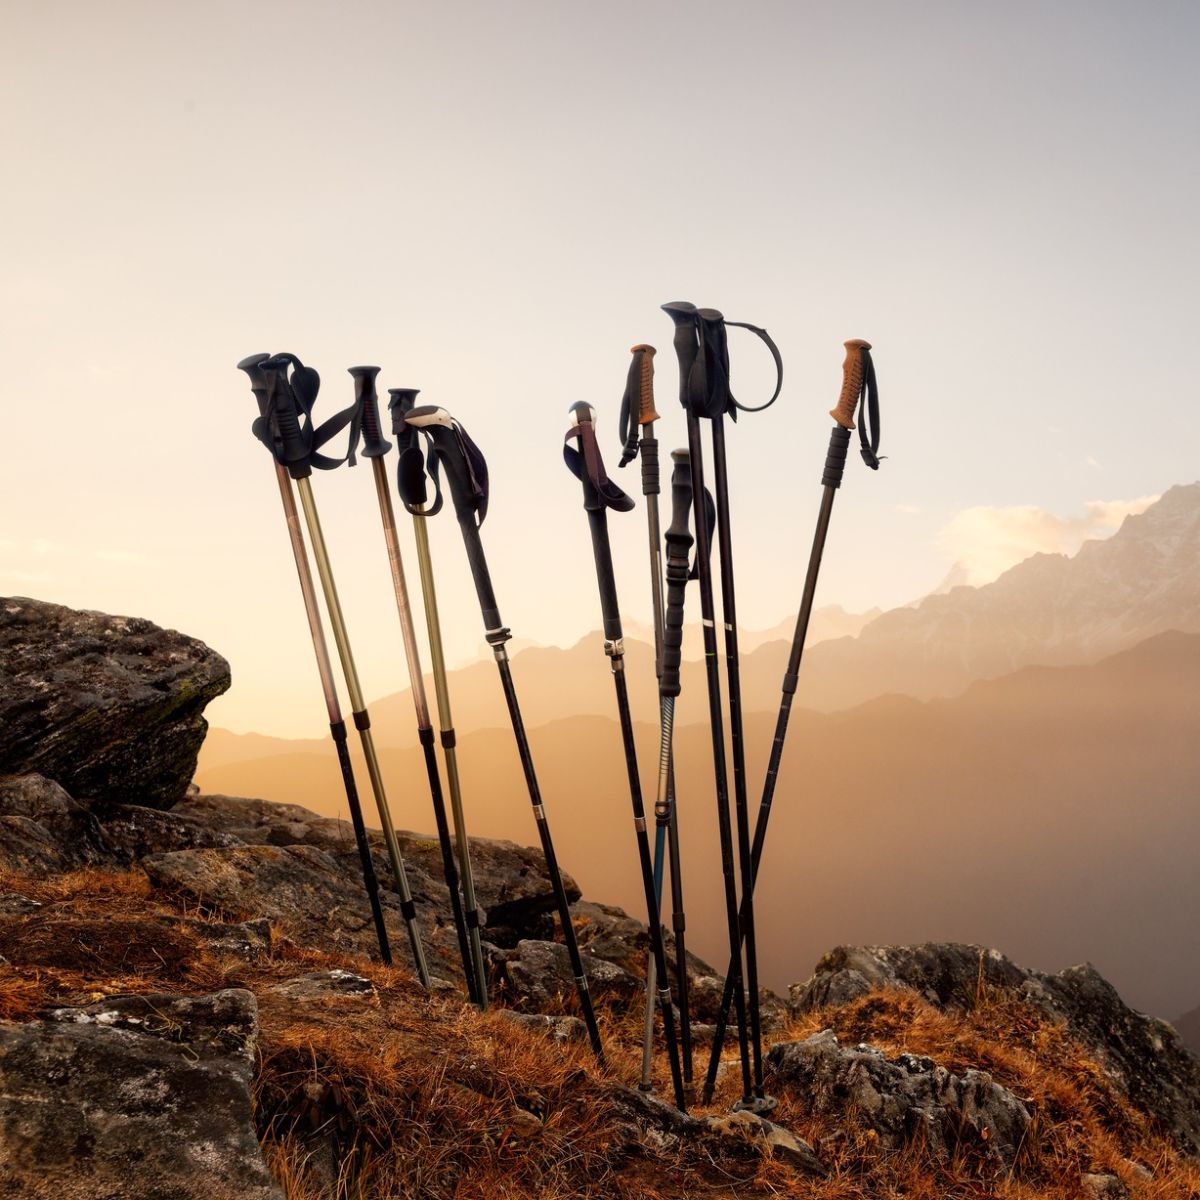 Bunch of trekking poles mounted in ground with snowy peak in background
